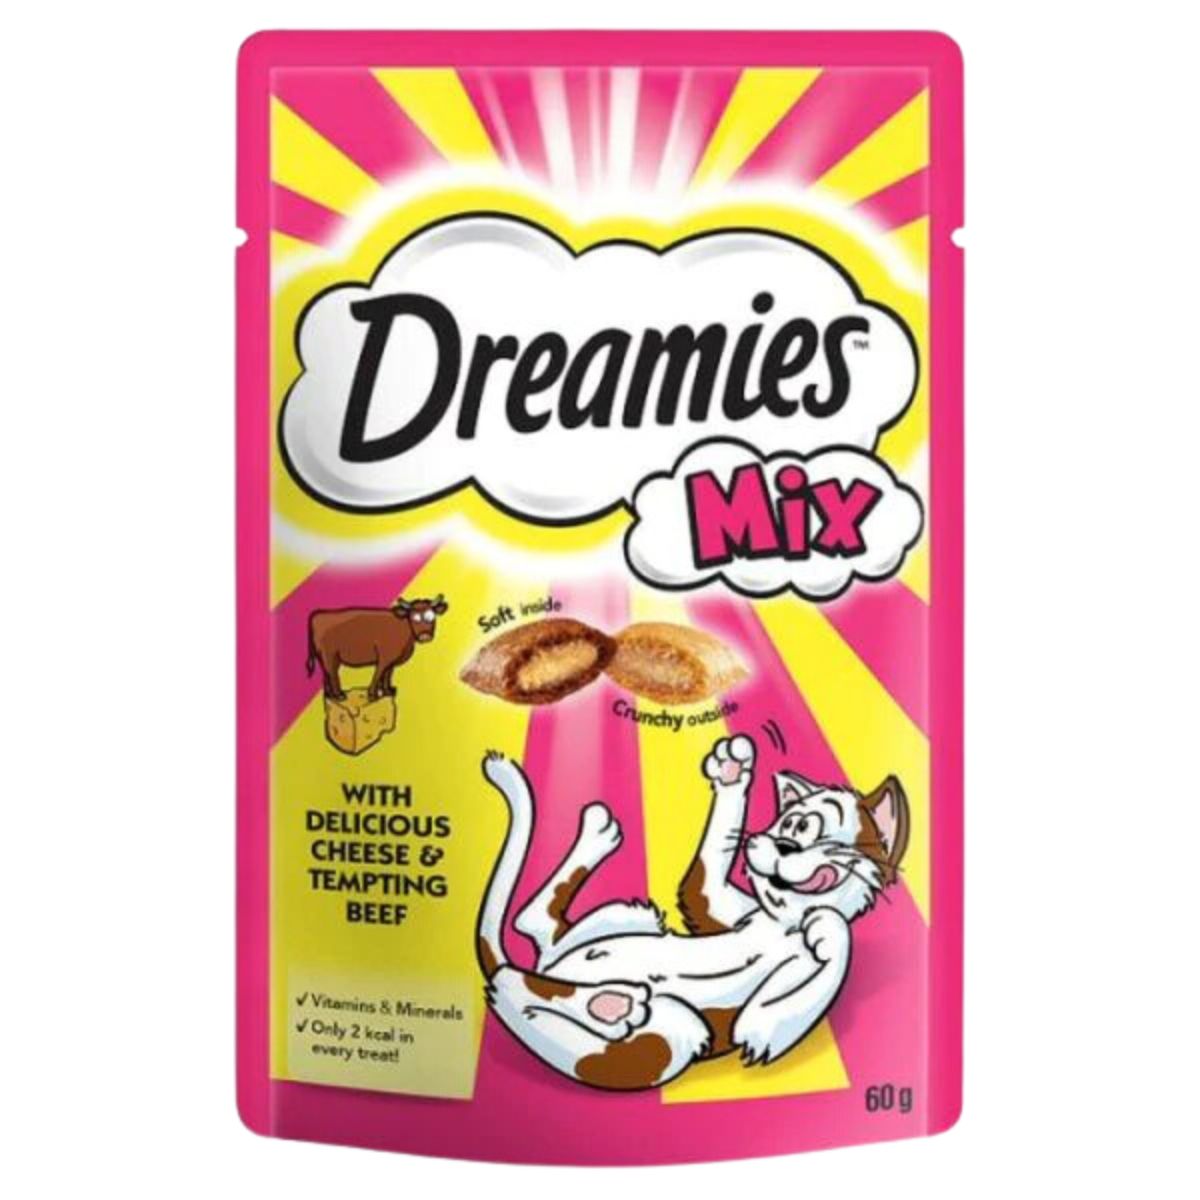 Dreamies Mix - with Delicious Cheese and Tempting Beef Treats - 60g cat treats.